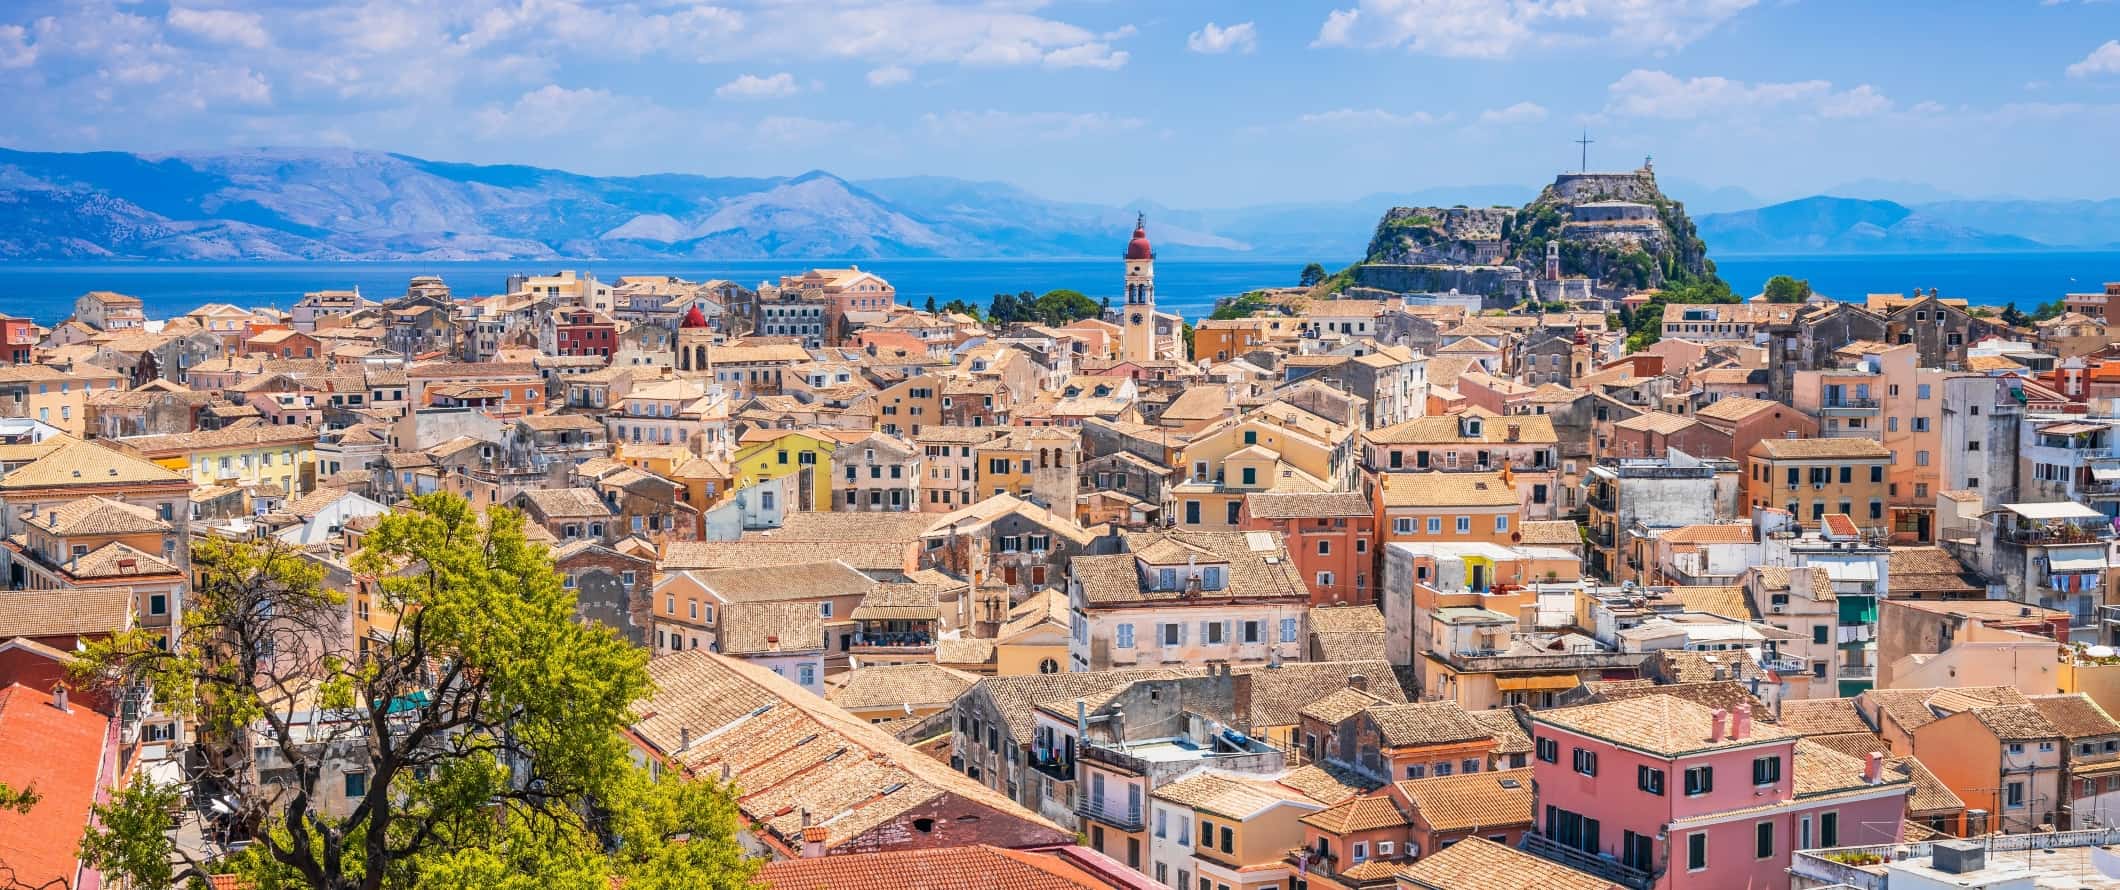 Aerial view of Corfu Town in Corfu, Greece, showing brightly colored houses with tiled roofs, and oceans and mountains in the background.